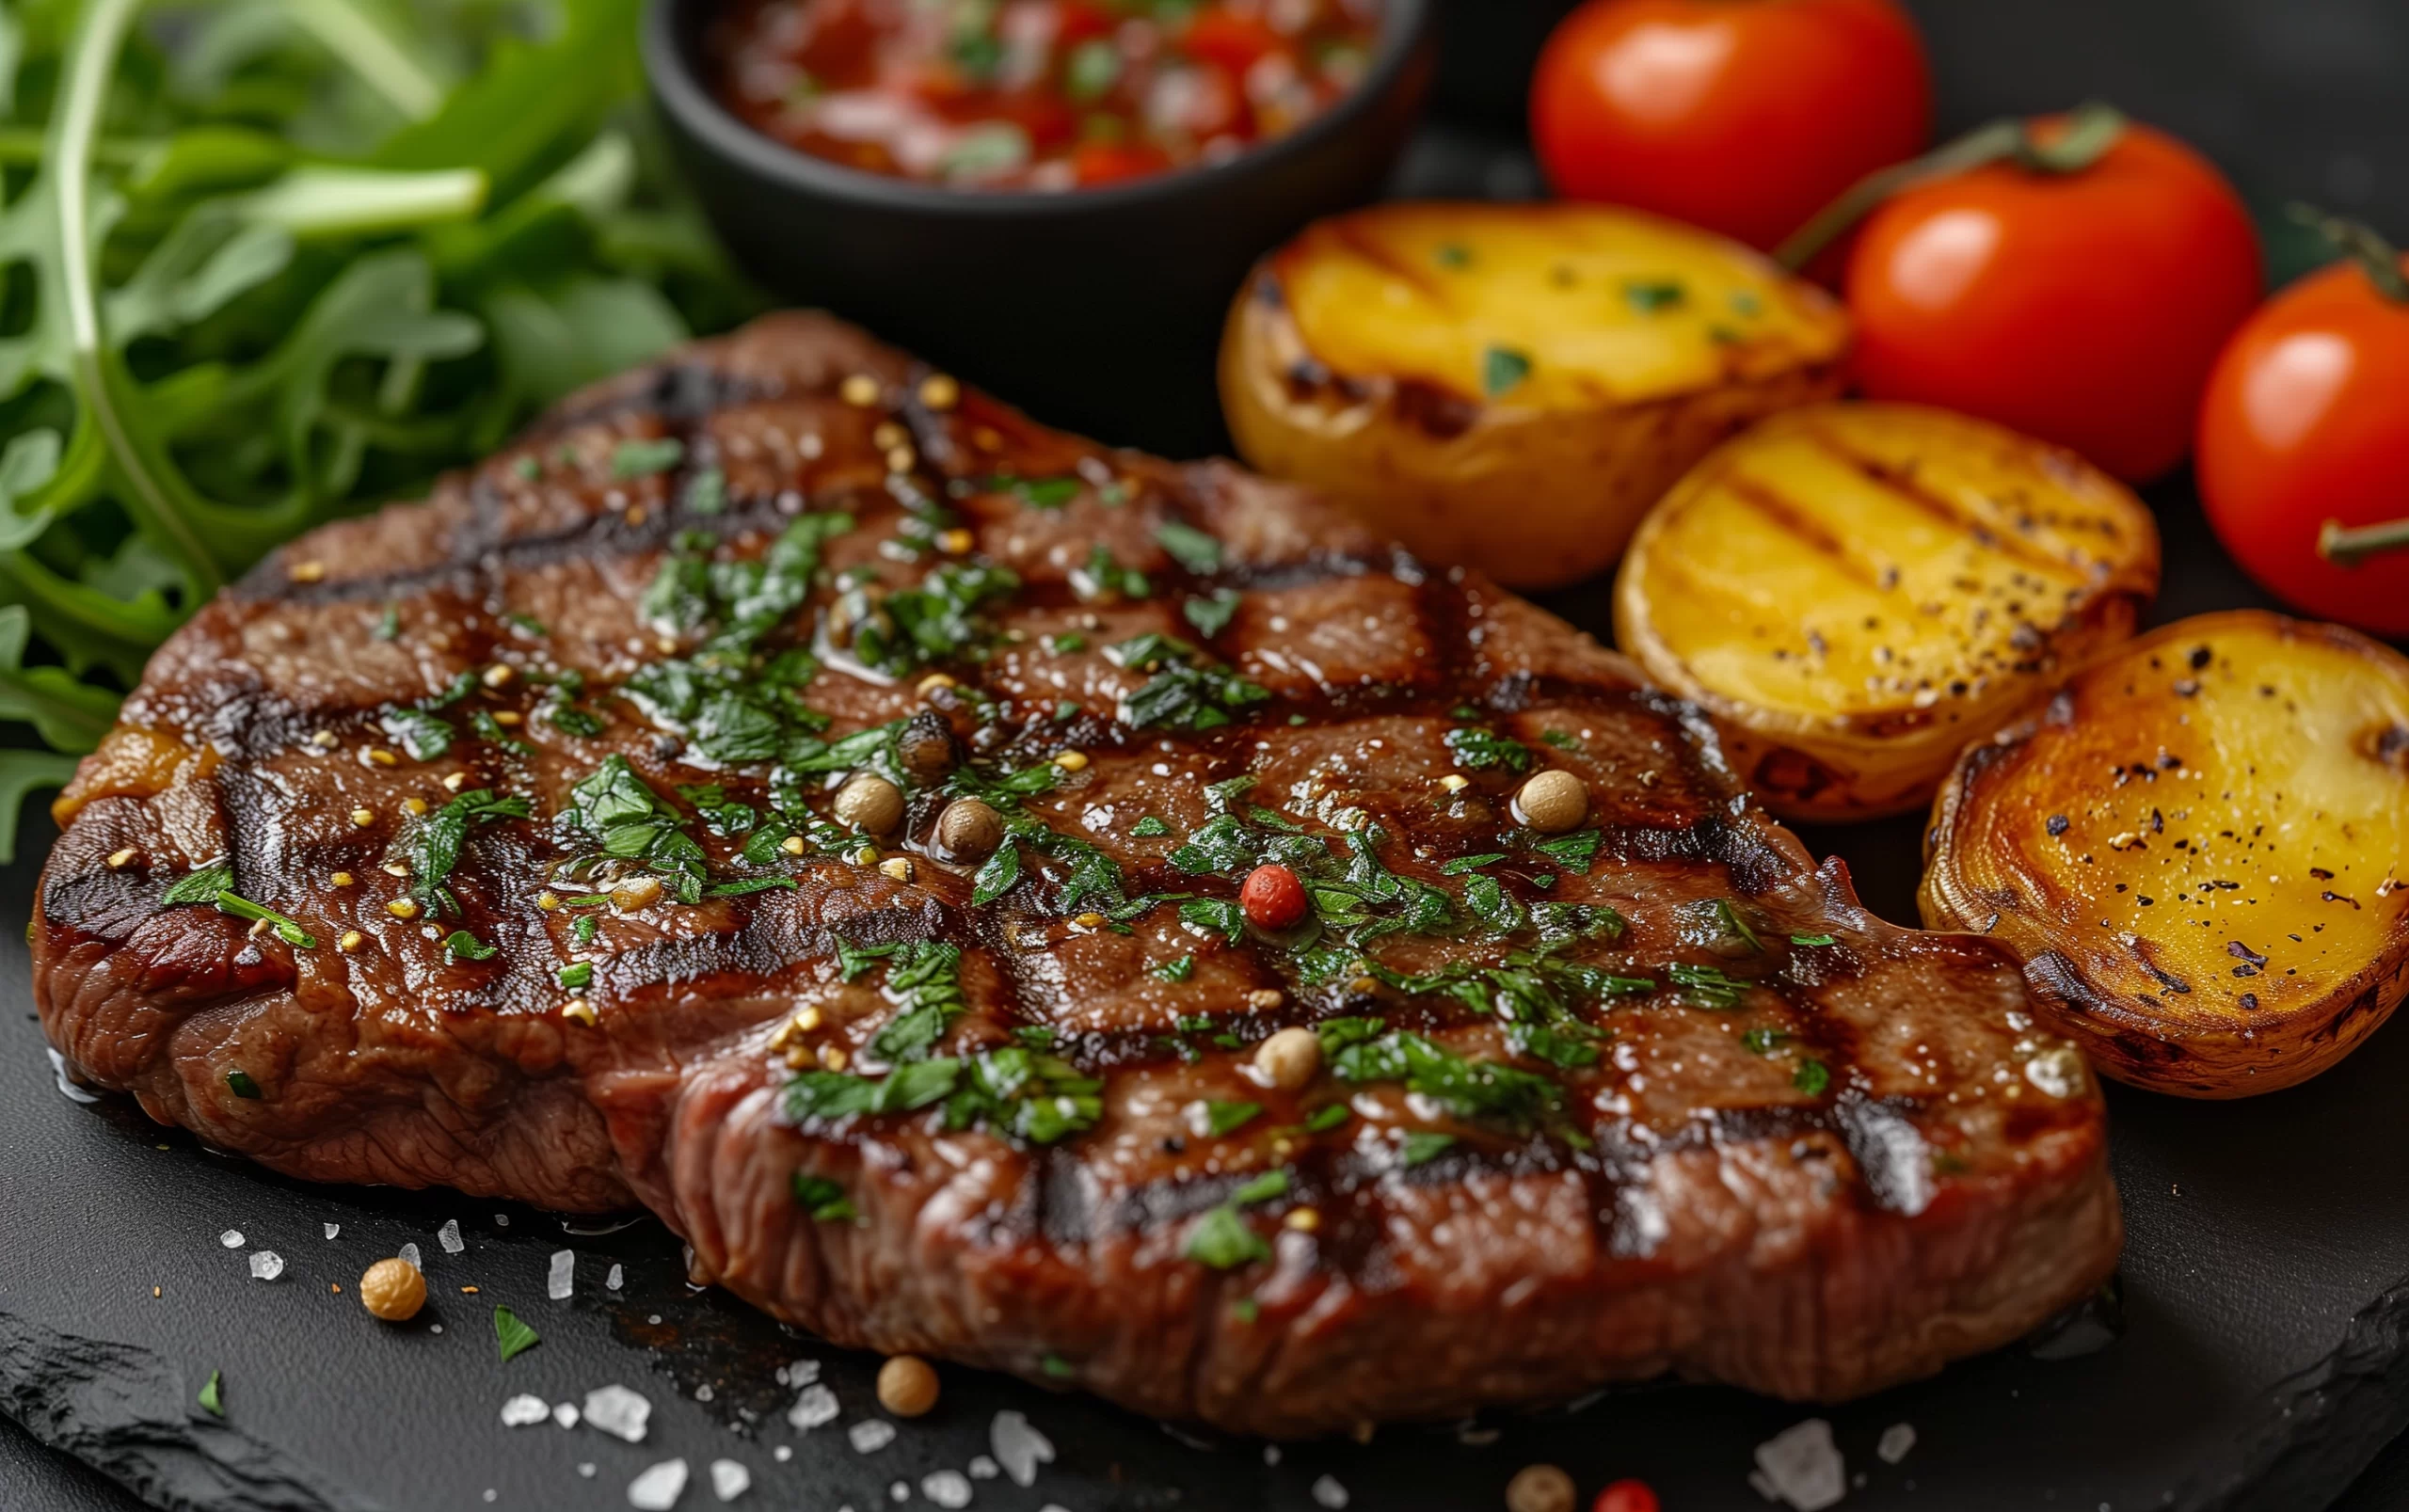 A close-up view of a perfect steak with grill marks, sizzling over charcoal flames on an outdoor grill, surrounded by rosemary sprigs and garlic cloves.